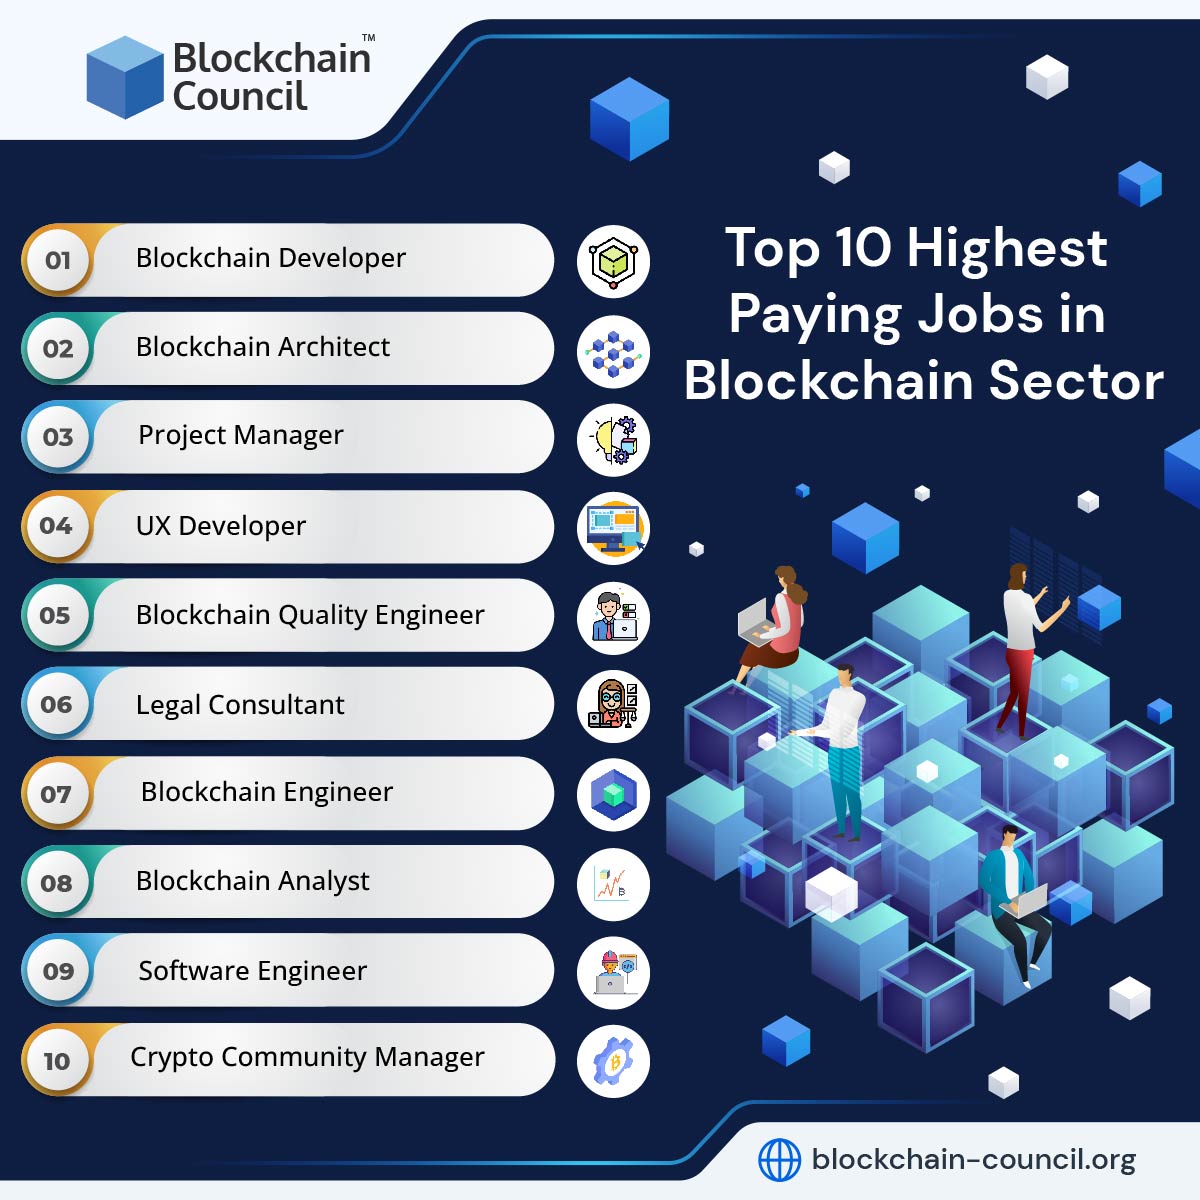 Top 10 Highest Paying Jobs in Blockchain Sector